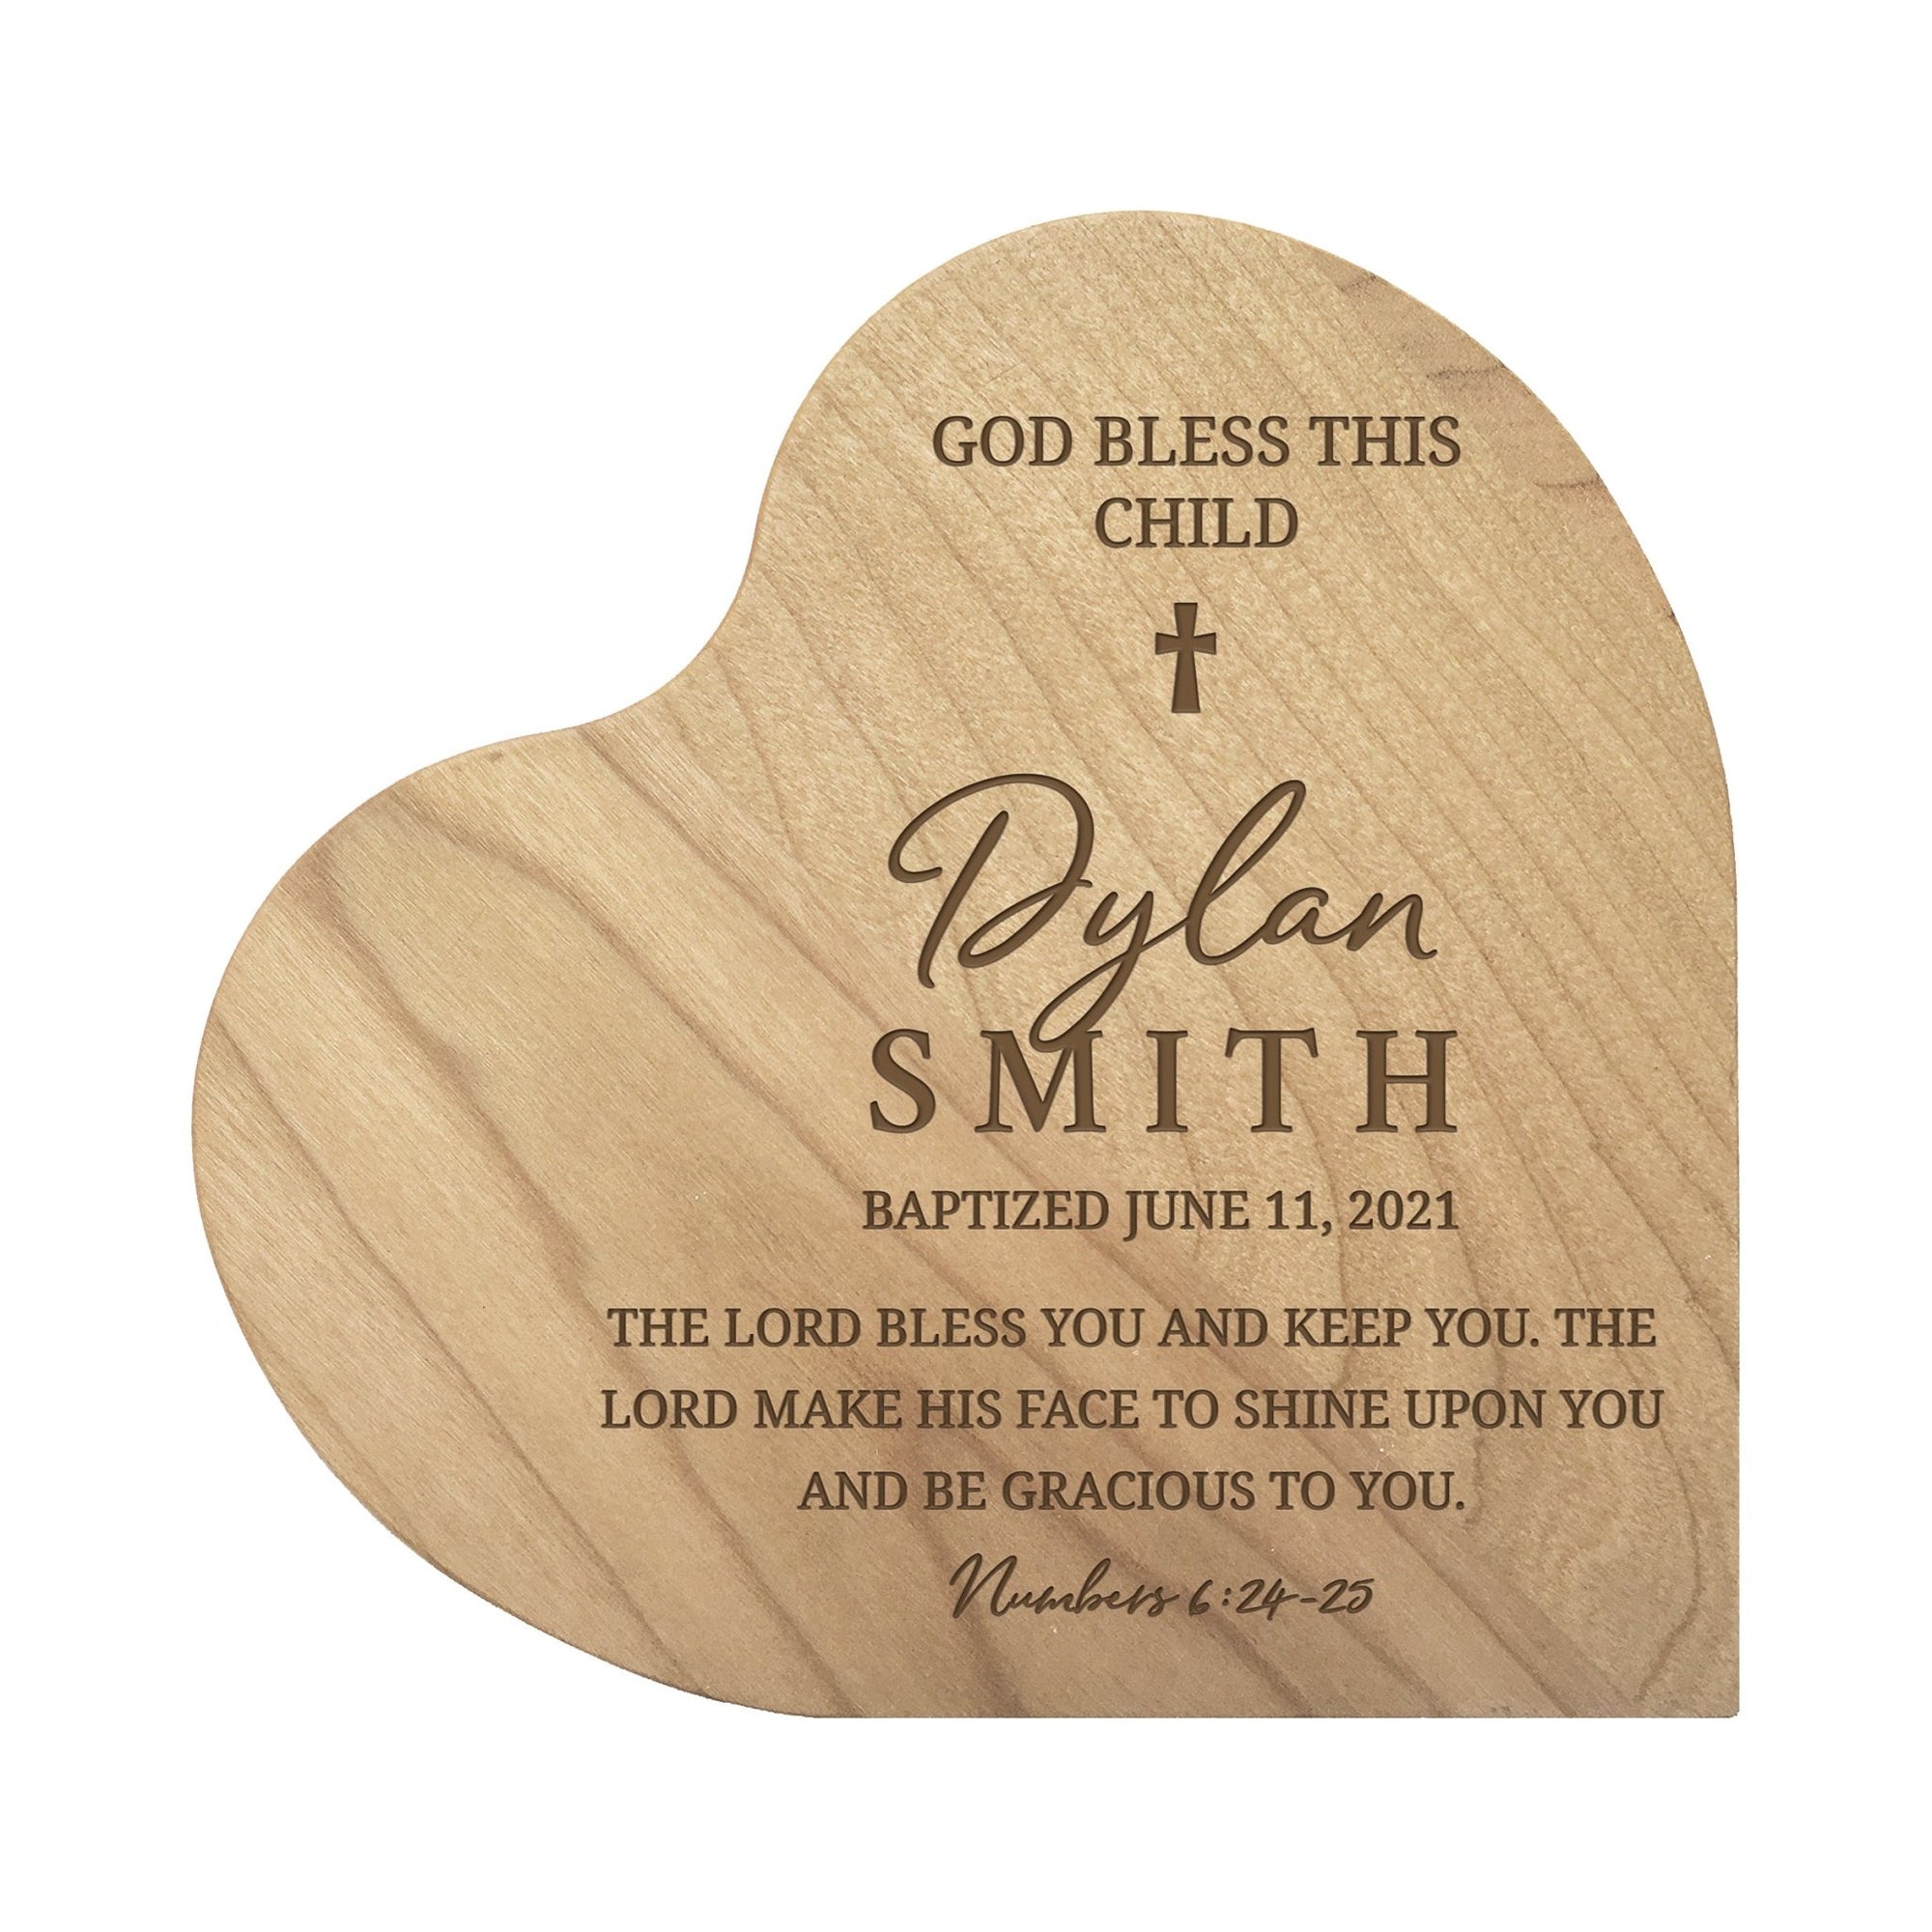 Personalized Gifts for godparents from godchild